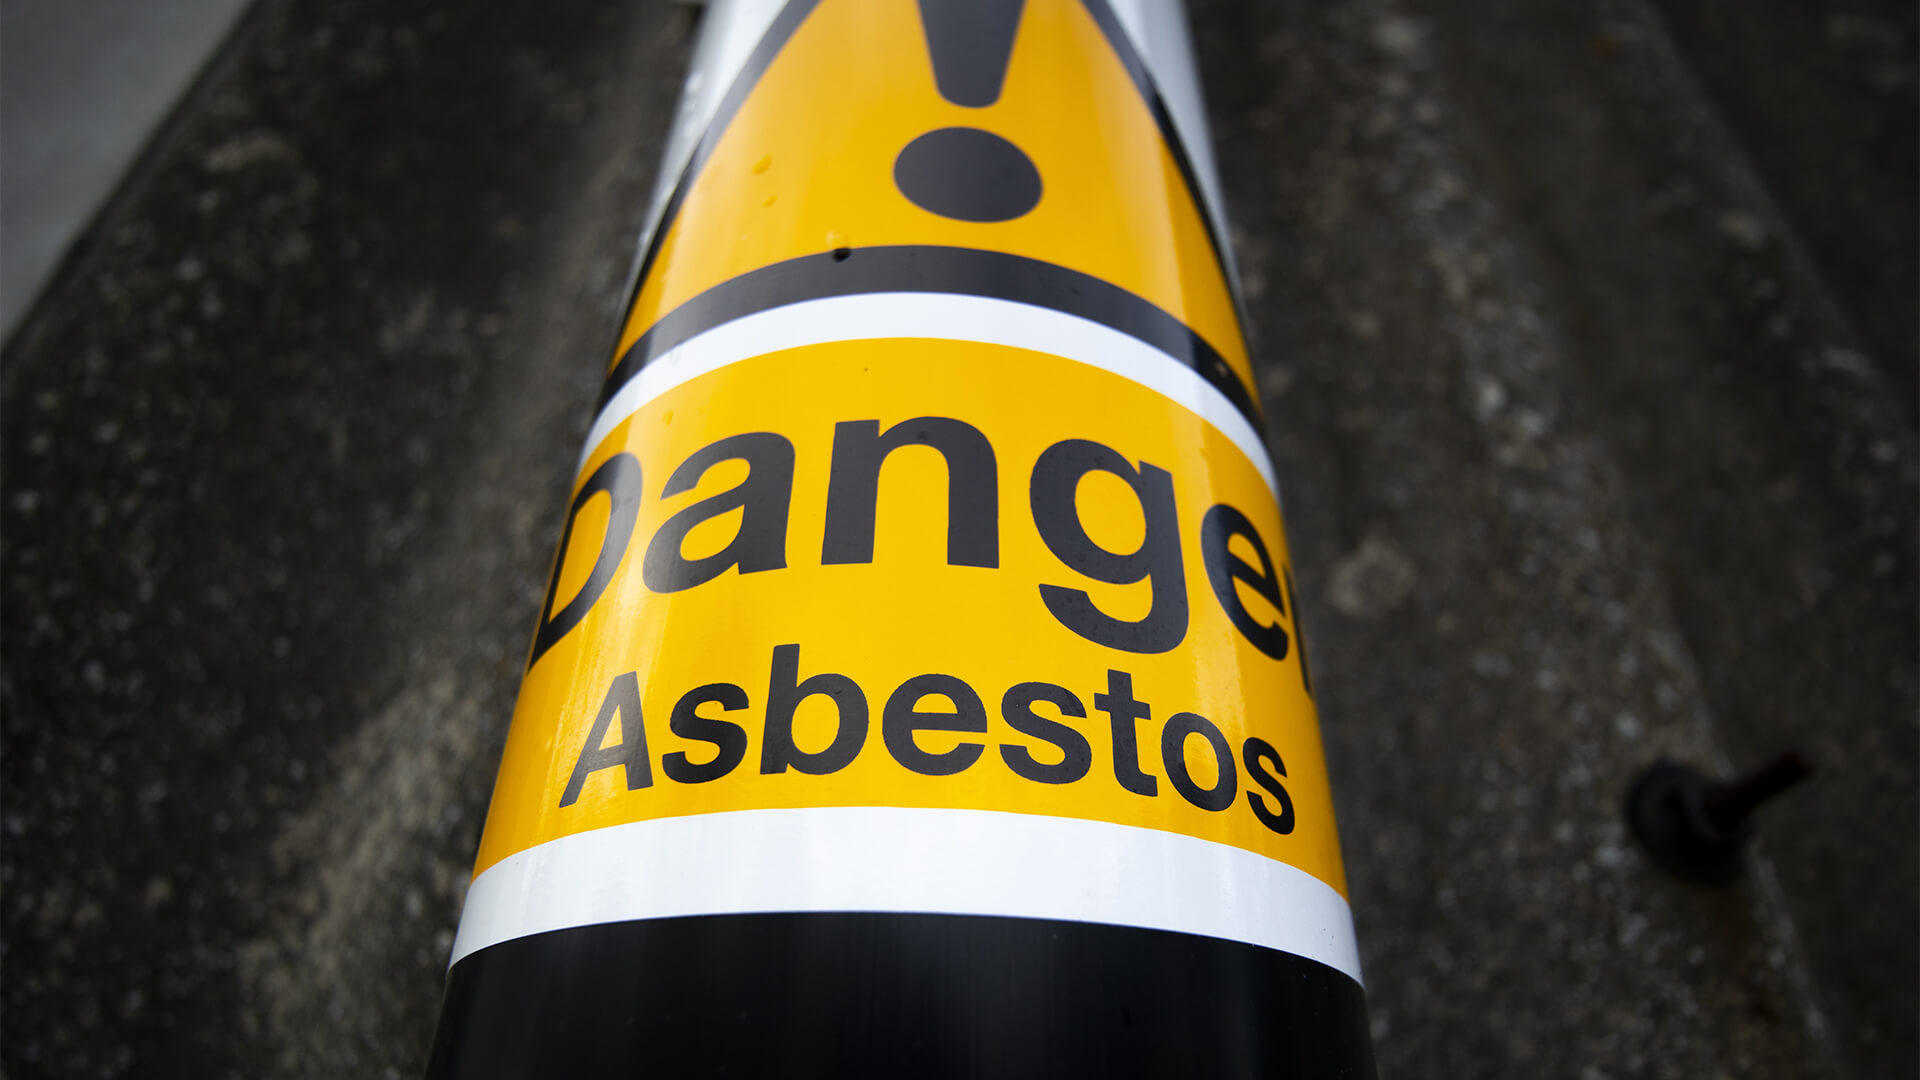 South East of England Has Suffered the Most Asbestos-Related Deaths